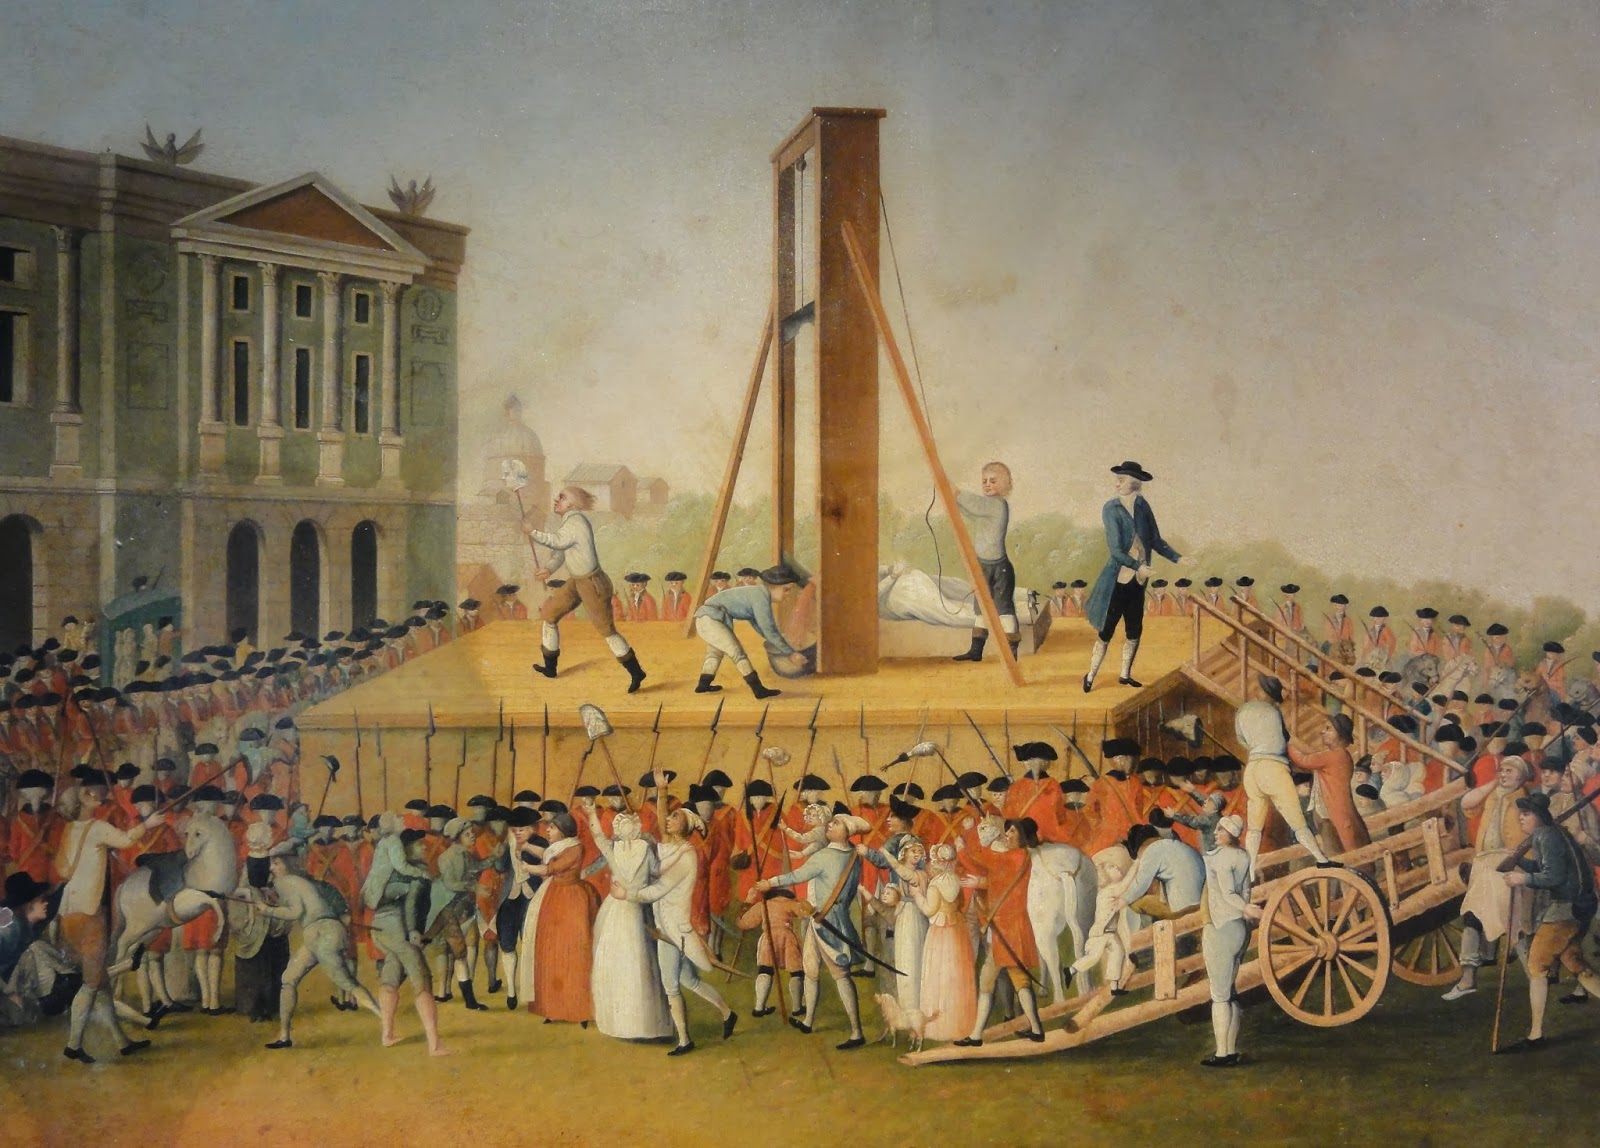 This historical painting depicts the execution of Marie Antoinette during the French Revolution. The scene is set in a public square, teeming with spectators and soldiers. In the center stands a wooden guillotine, its blade poised high against a hazy sky. Marie Antoinette, in a simple white dress, is portrayed at the moment before her execution, her regal bearing still evident despite her circumstances. She is surrounded by executioners and guards, some of whom are holding her down while others prepare the instrument of death. The crowd, a mix of civilians and military personnel, watches with a range of emotions. Some show signs of distress, while others appear impassive. The background features classical buildings, hinting at the Parisian setting. The overall mood of the painting is somber, capturing a notorious and grim moment in history.